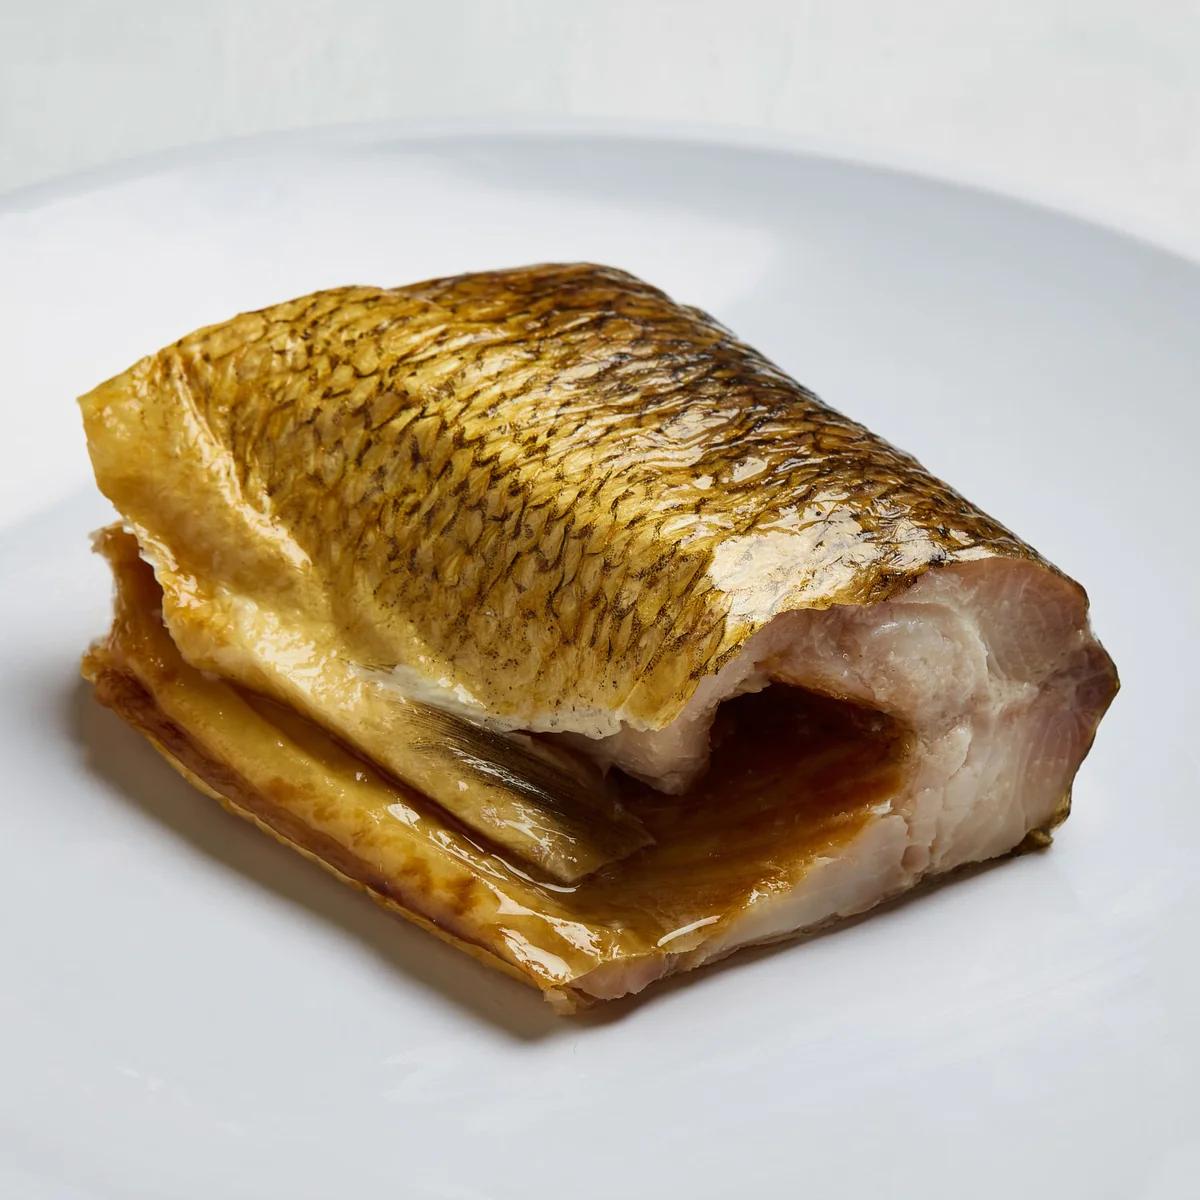 is smoked white fish healthy - What are the benefits of eating smoked whitefish